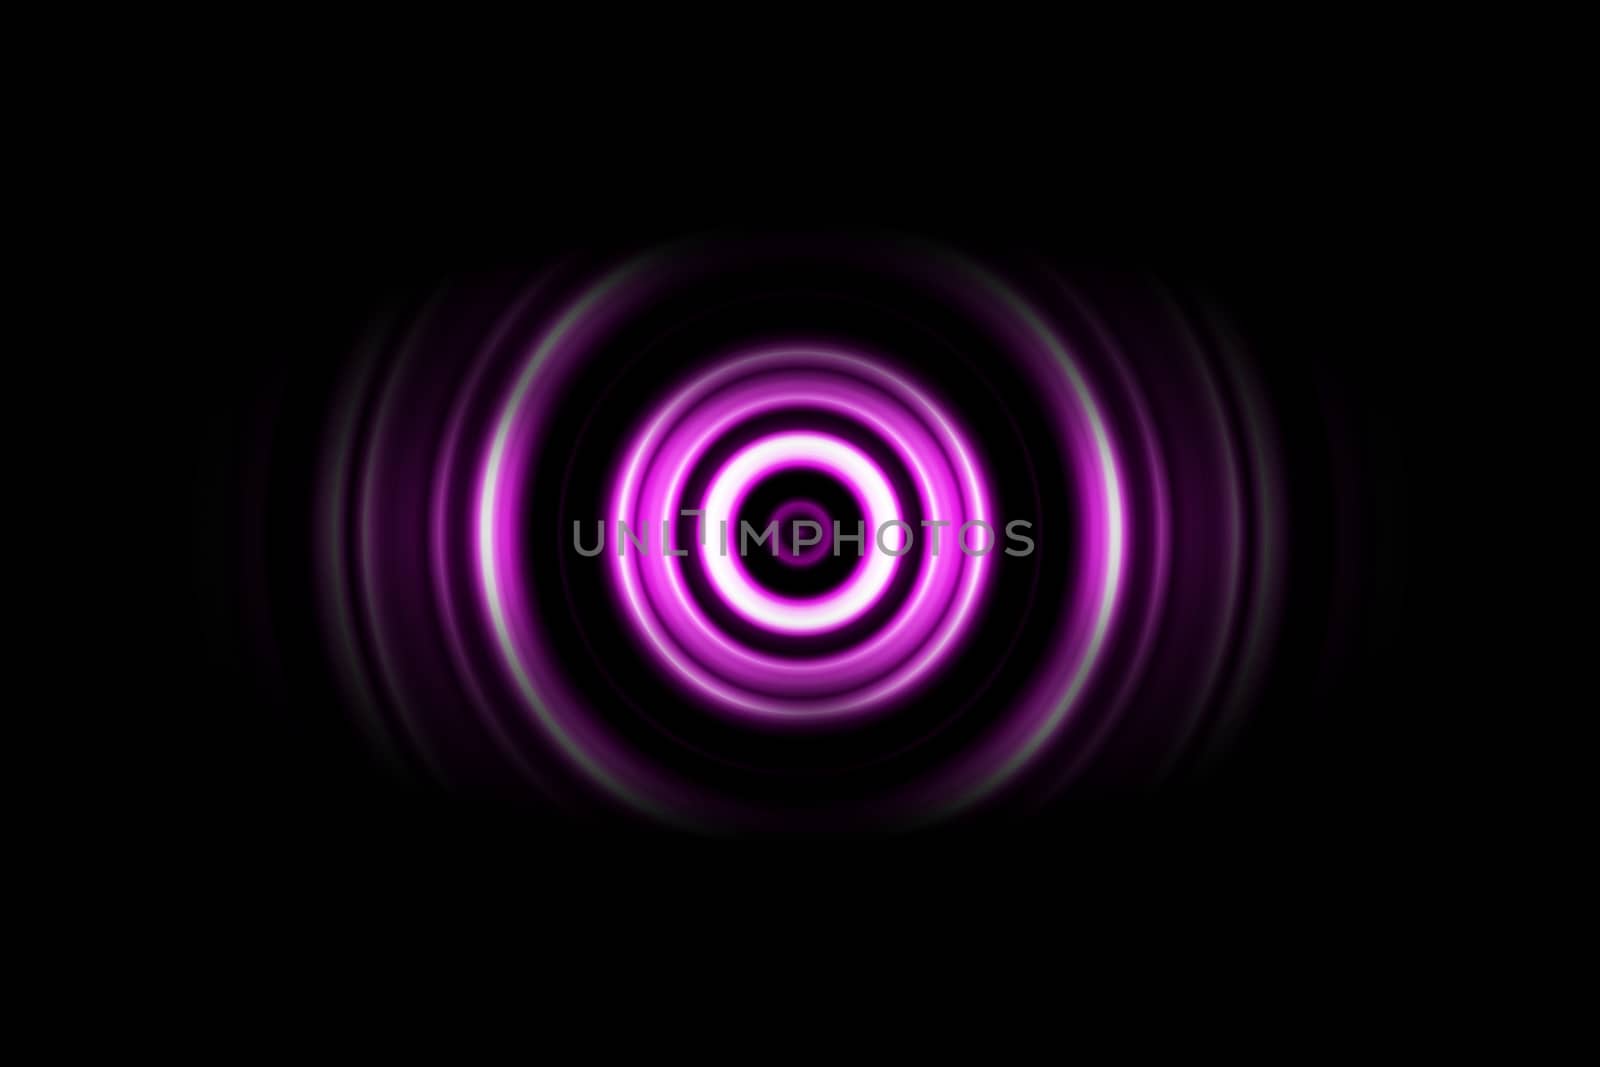 Purple digital sound wave or circle signal, abstract background by mouu007